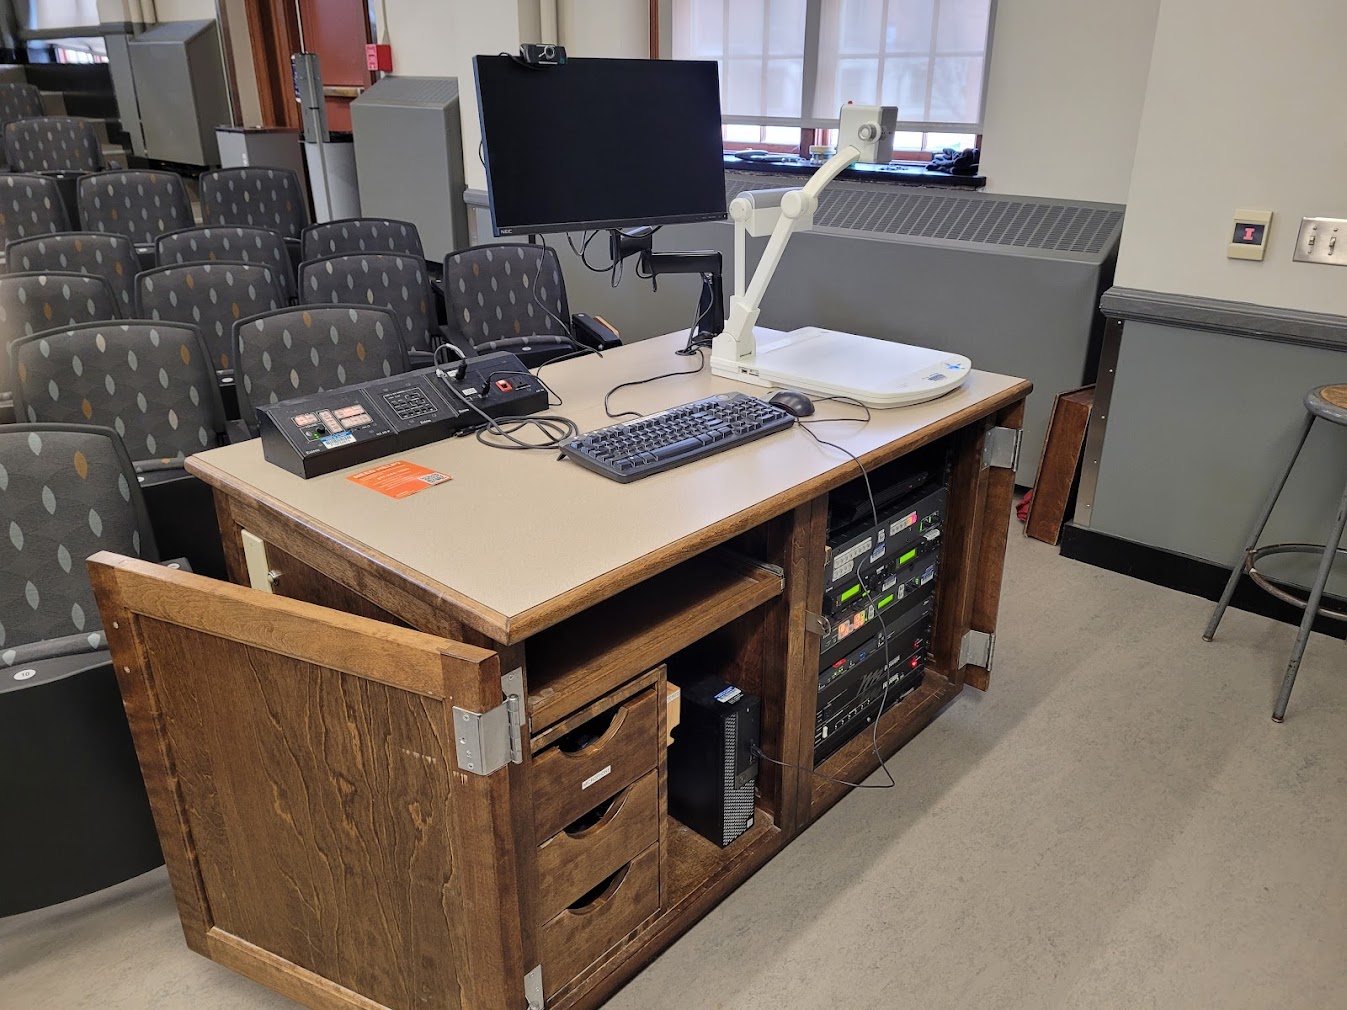 A view of the open cabinet with a computer monitor, HDMI input, a push button controller, document camera, and audio visual rack.95459